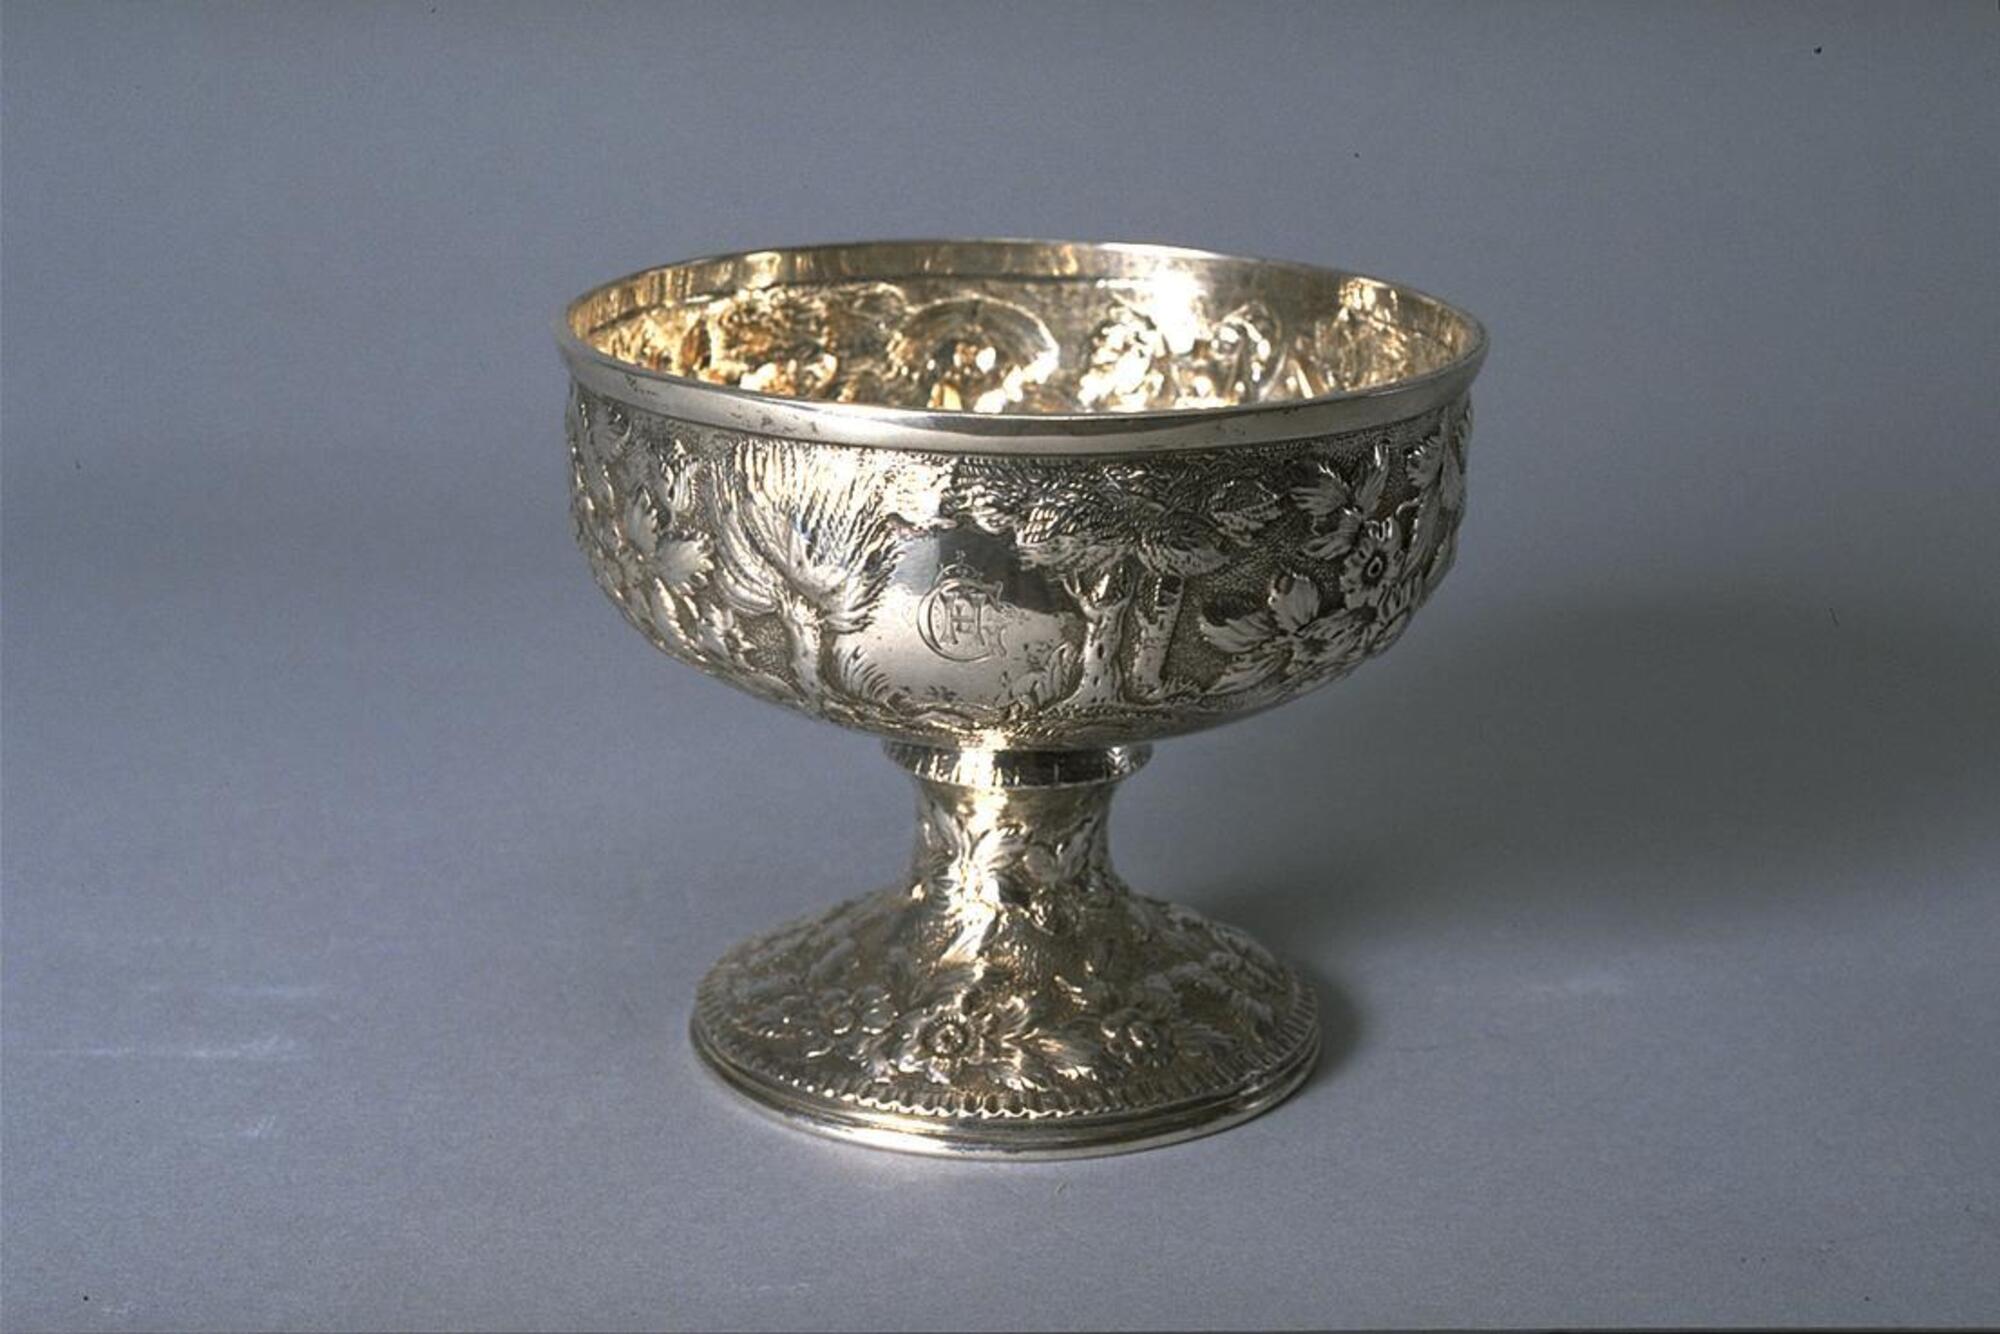 Silver vessel with bowl-shaped body, stemmed foot and opulent repouss&eacute; decoration